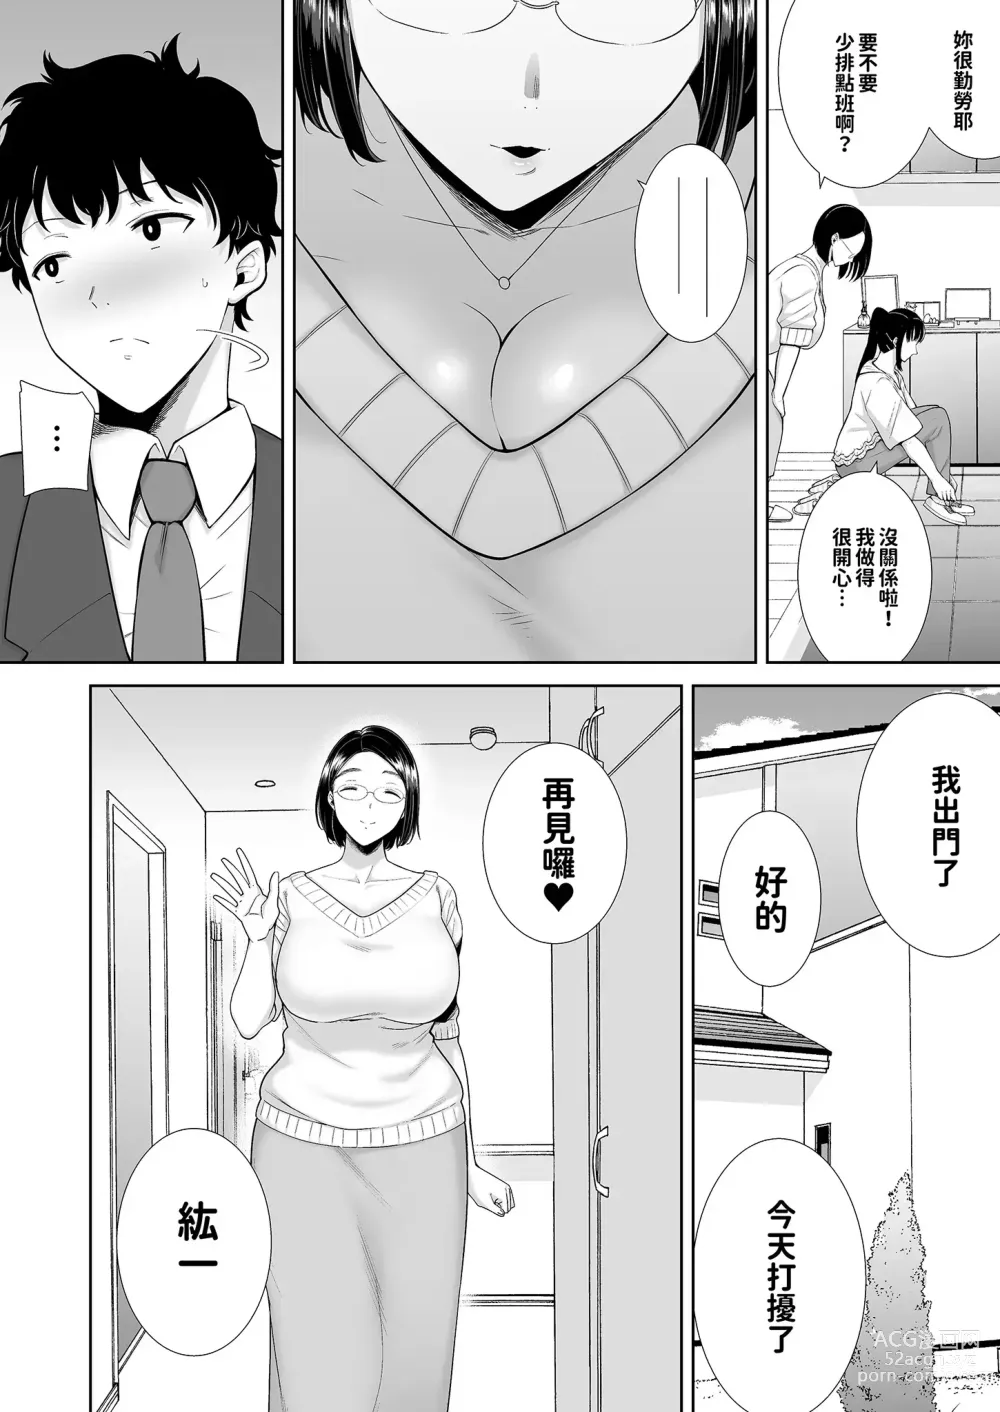 Page 5 of doujinshi KanoMama Syndrome 1 glass ver